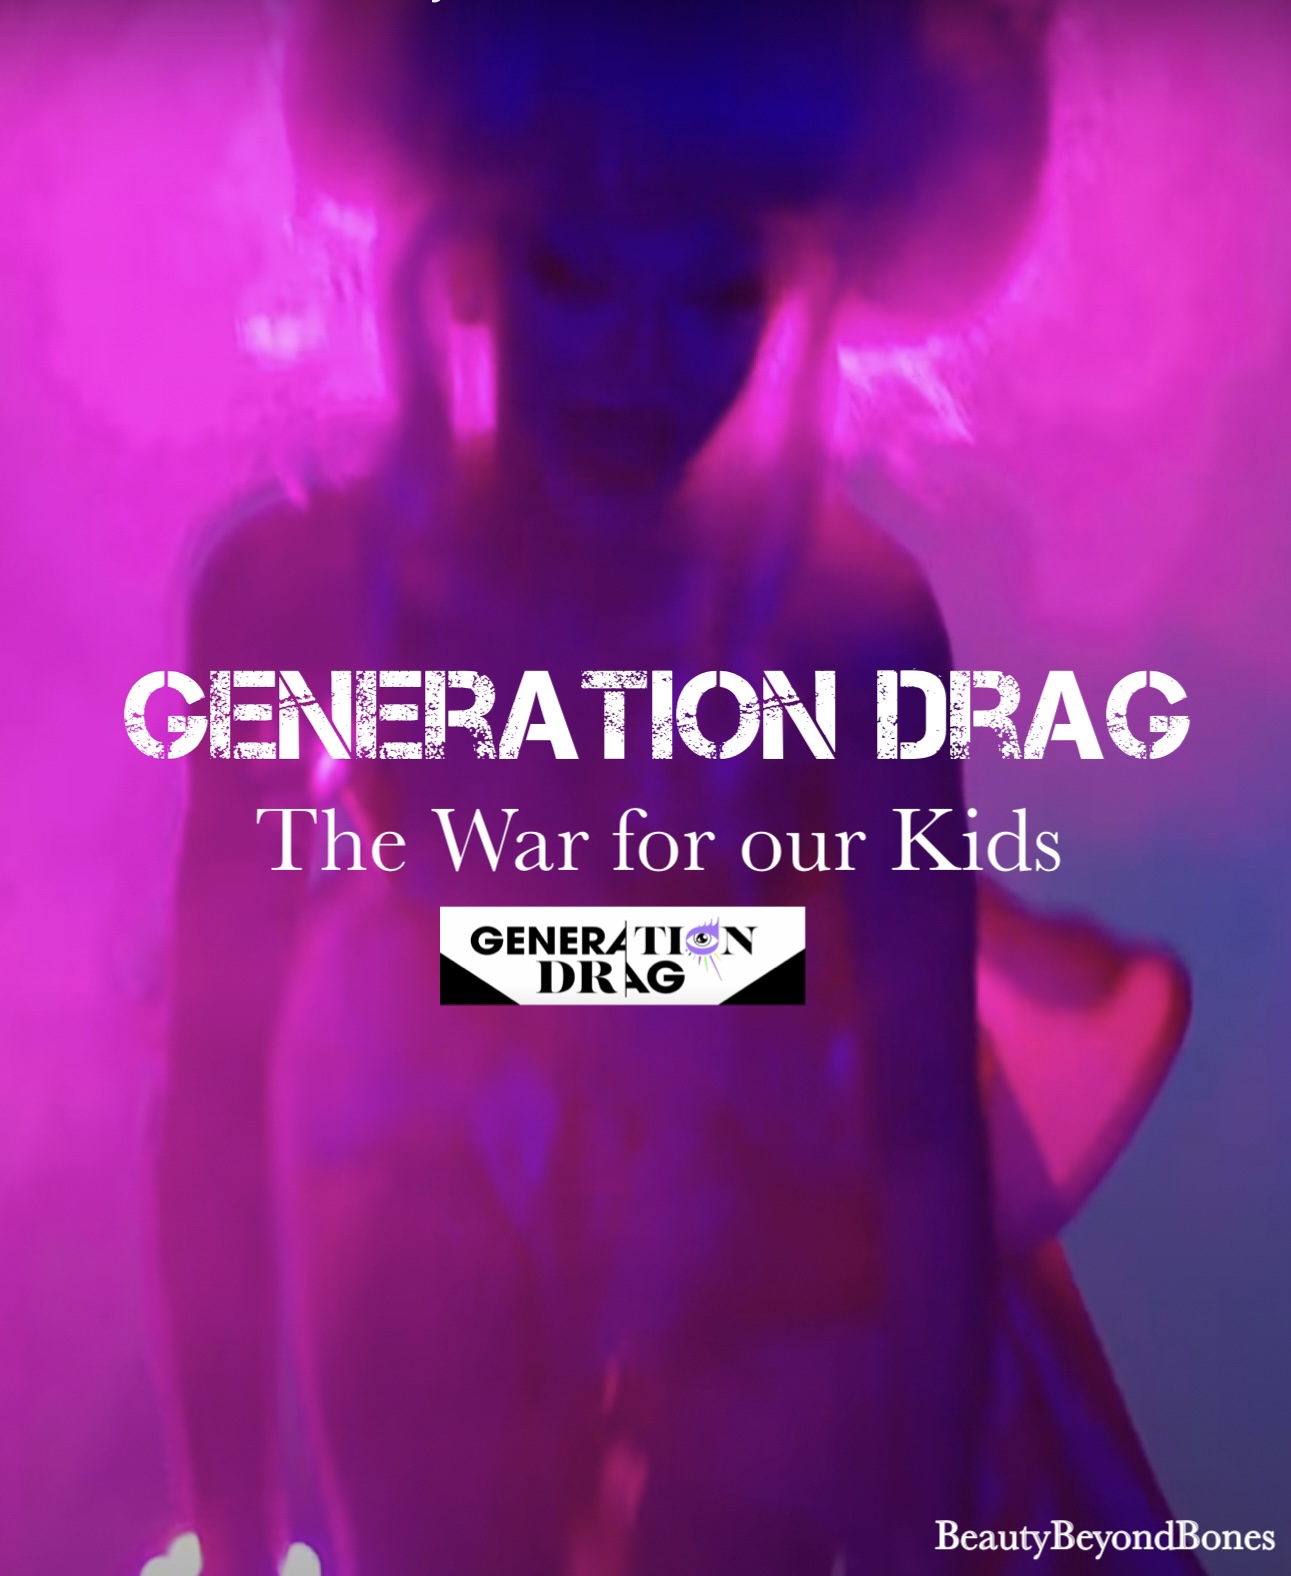 Generation Drag: The War for our Kids